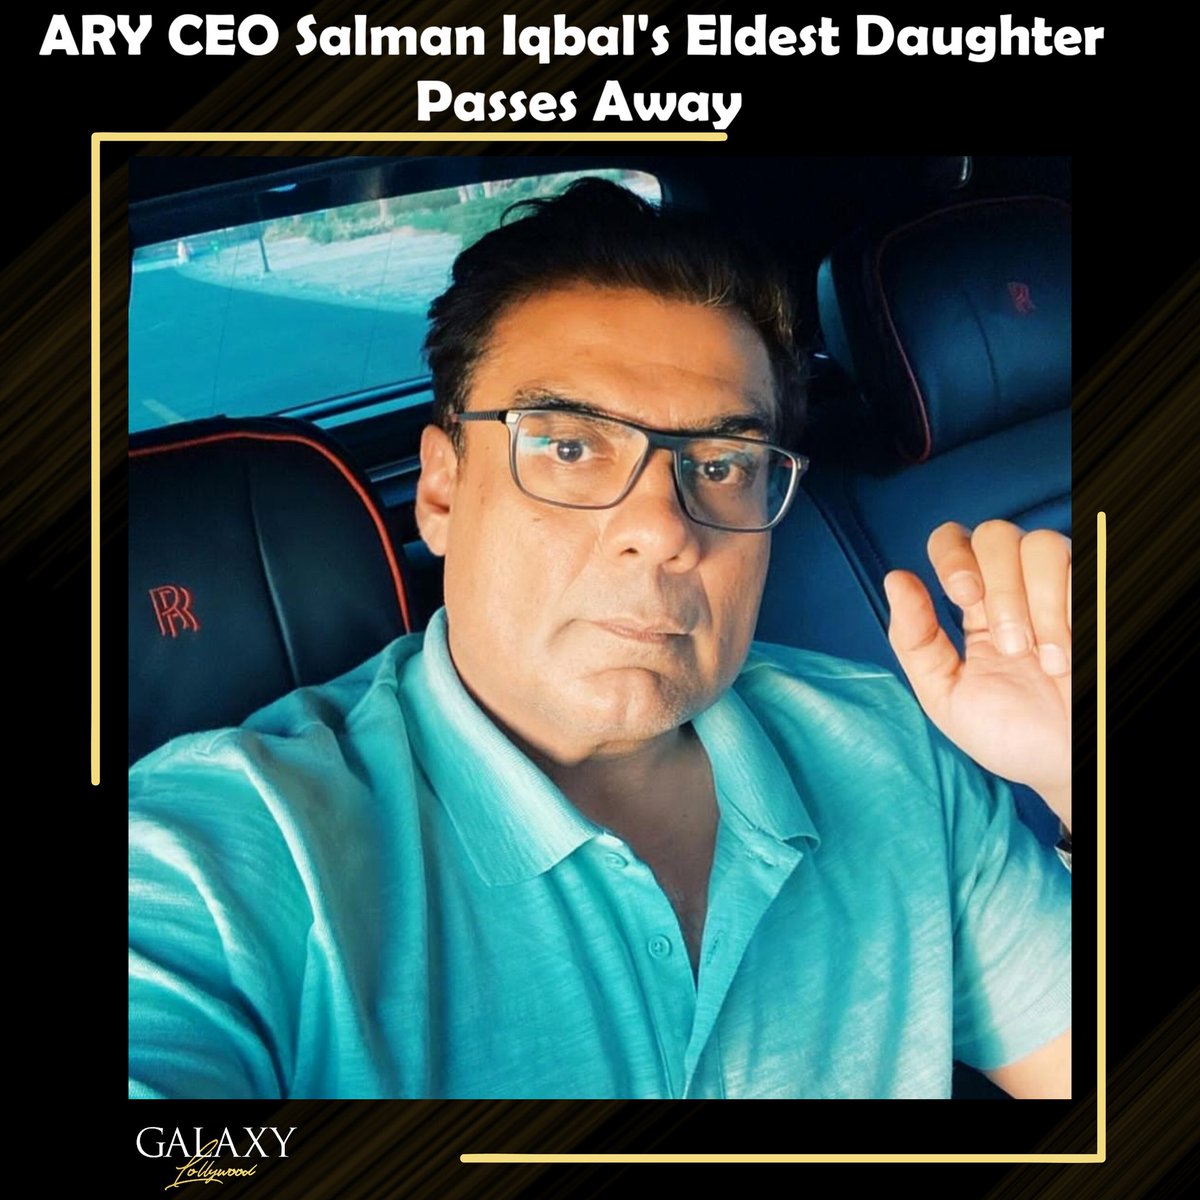 ARY News took to social media to share that their CEO, Salman Iqbal's eldest daughter has passed away, as they request all to pray for her soul. #SalmanIqbal